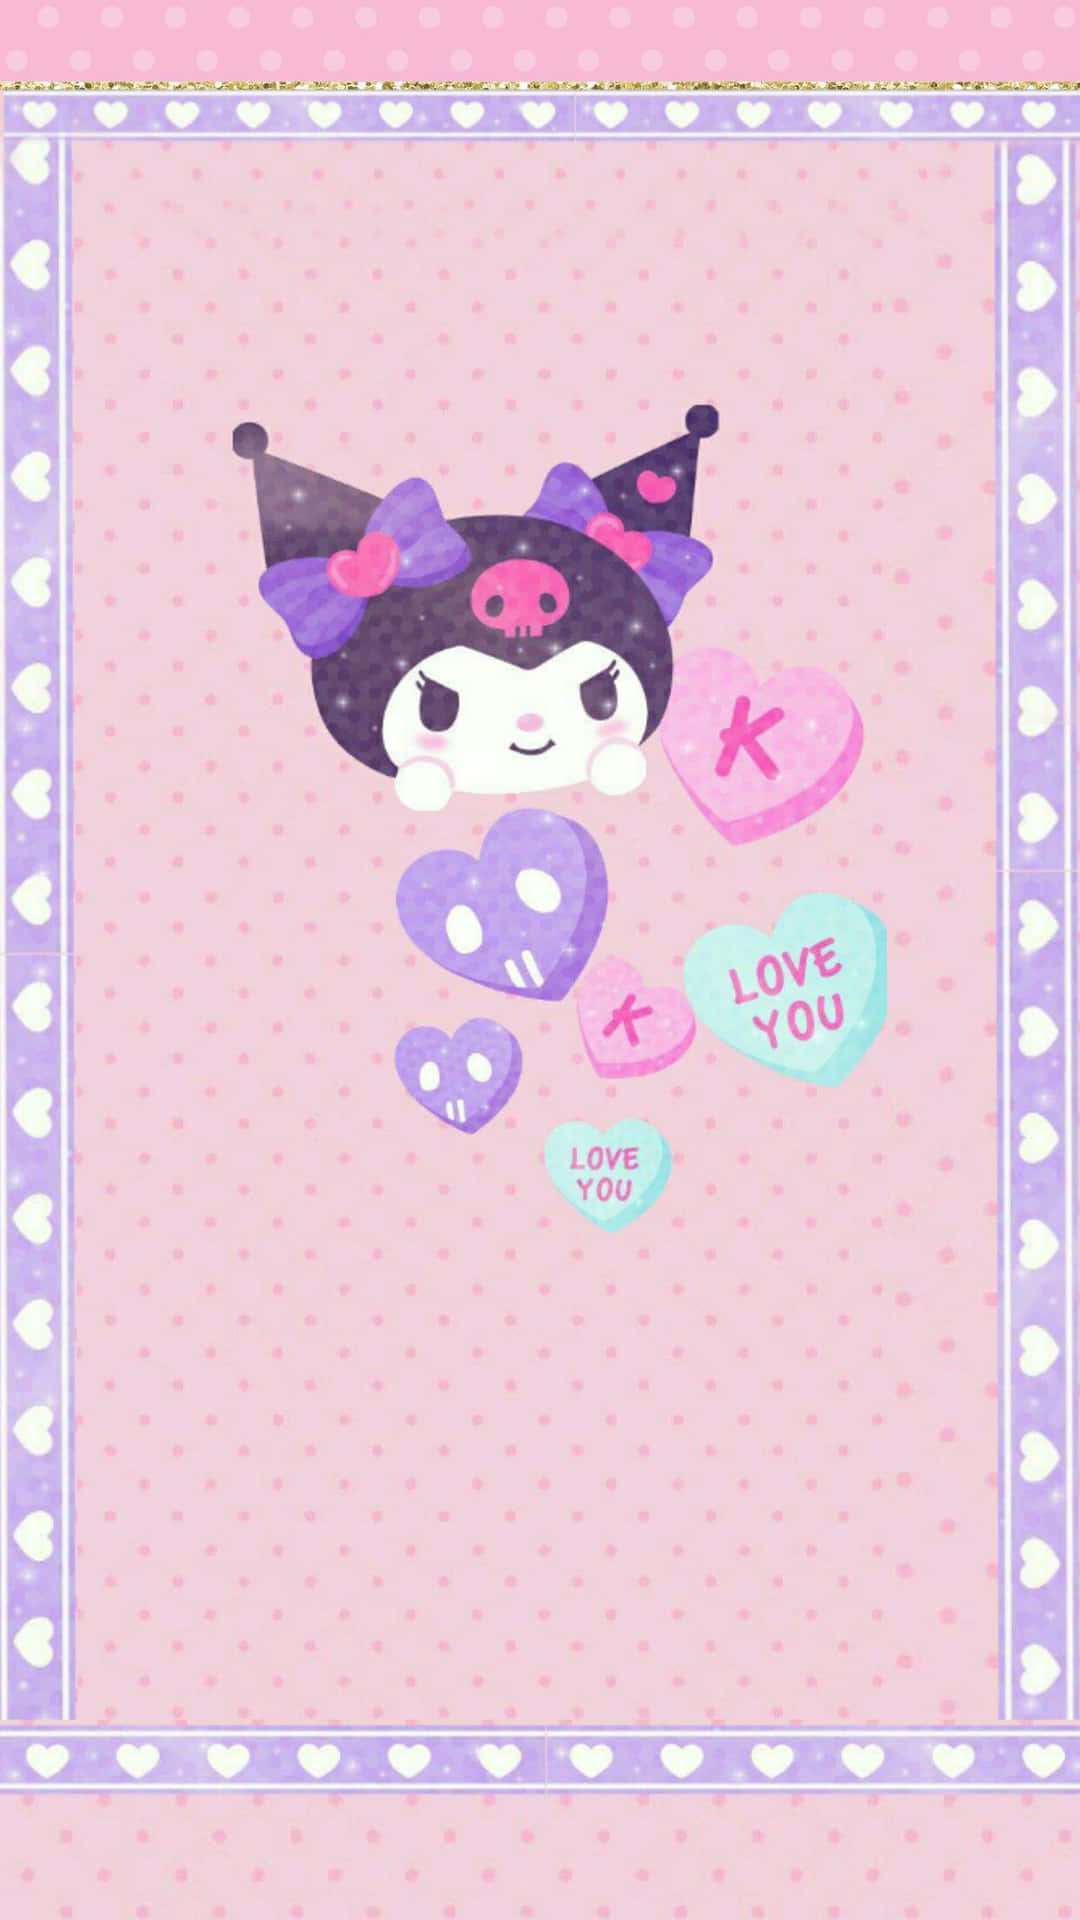 Get your Kuromi iPhone today and be the talk of the town! Wallpaper